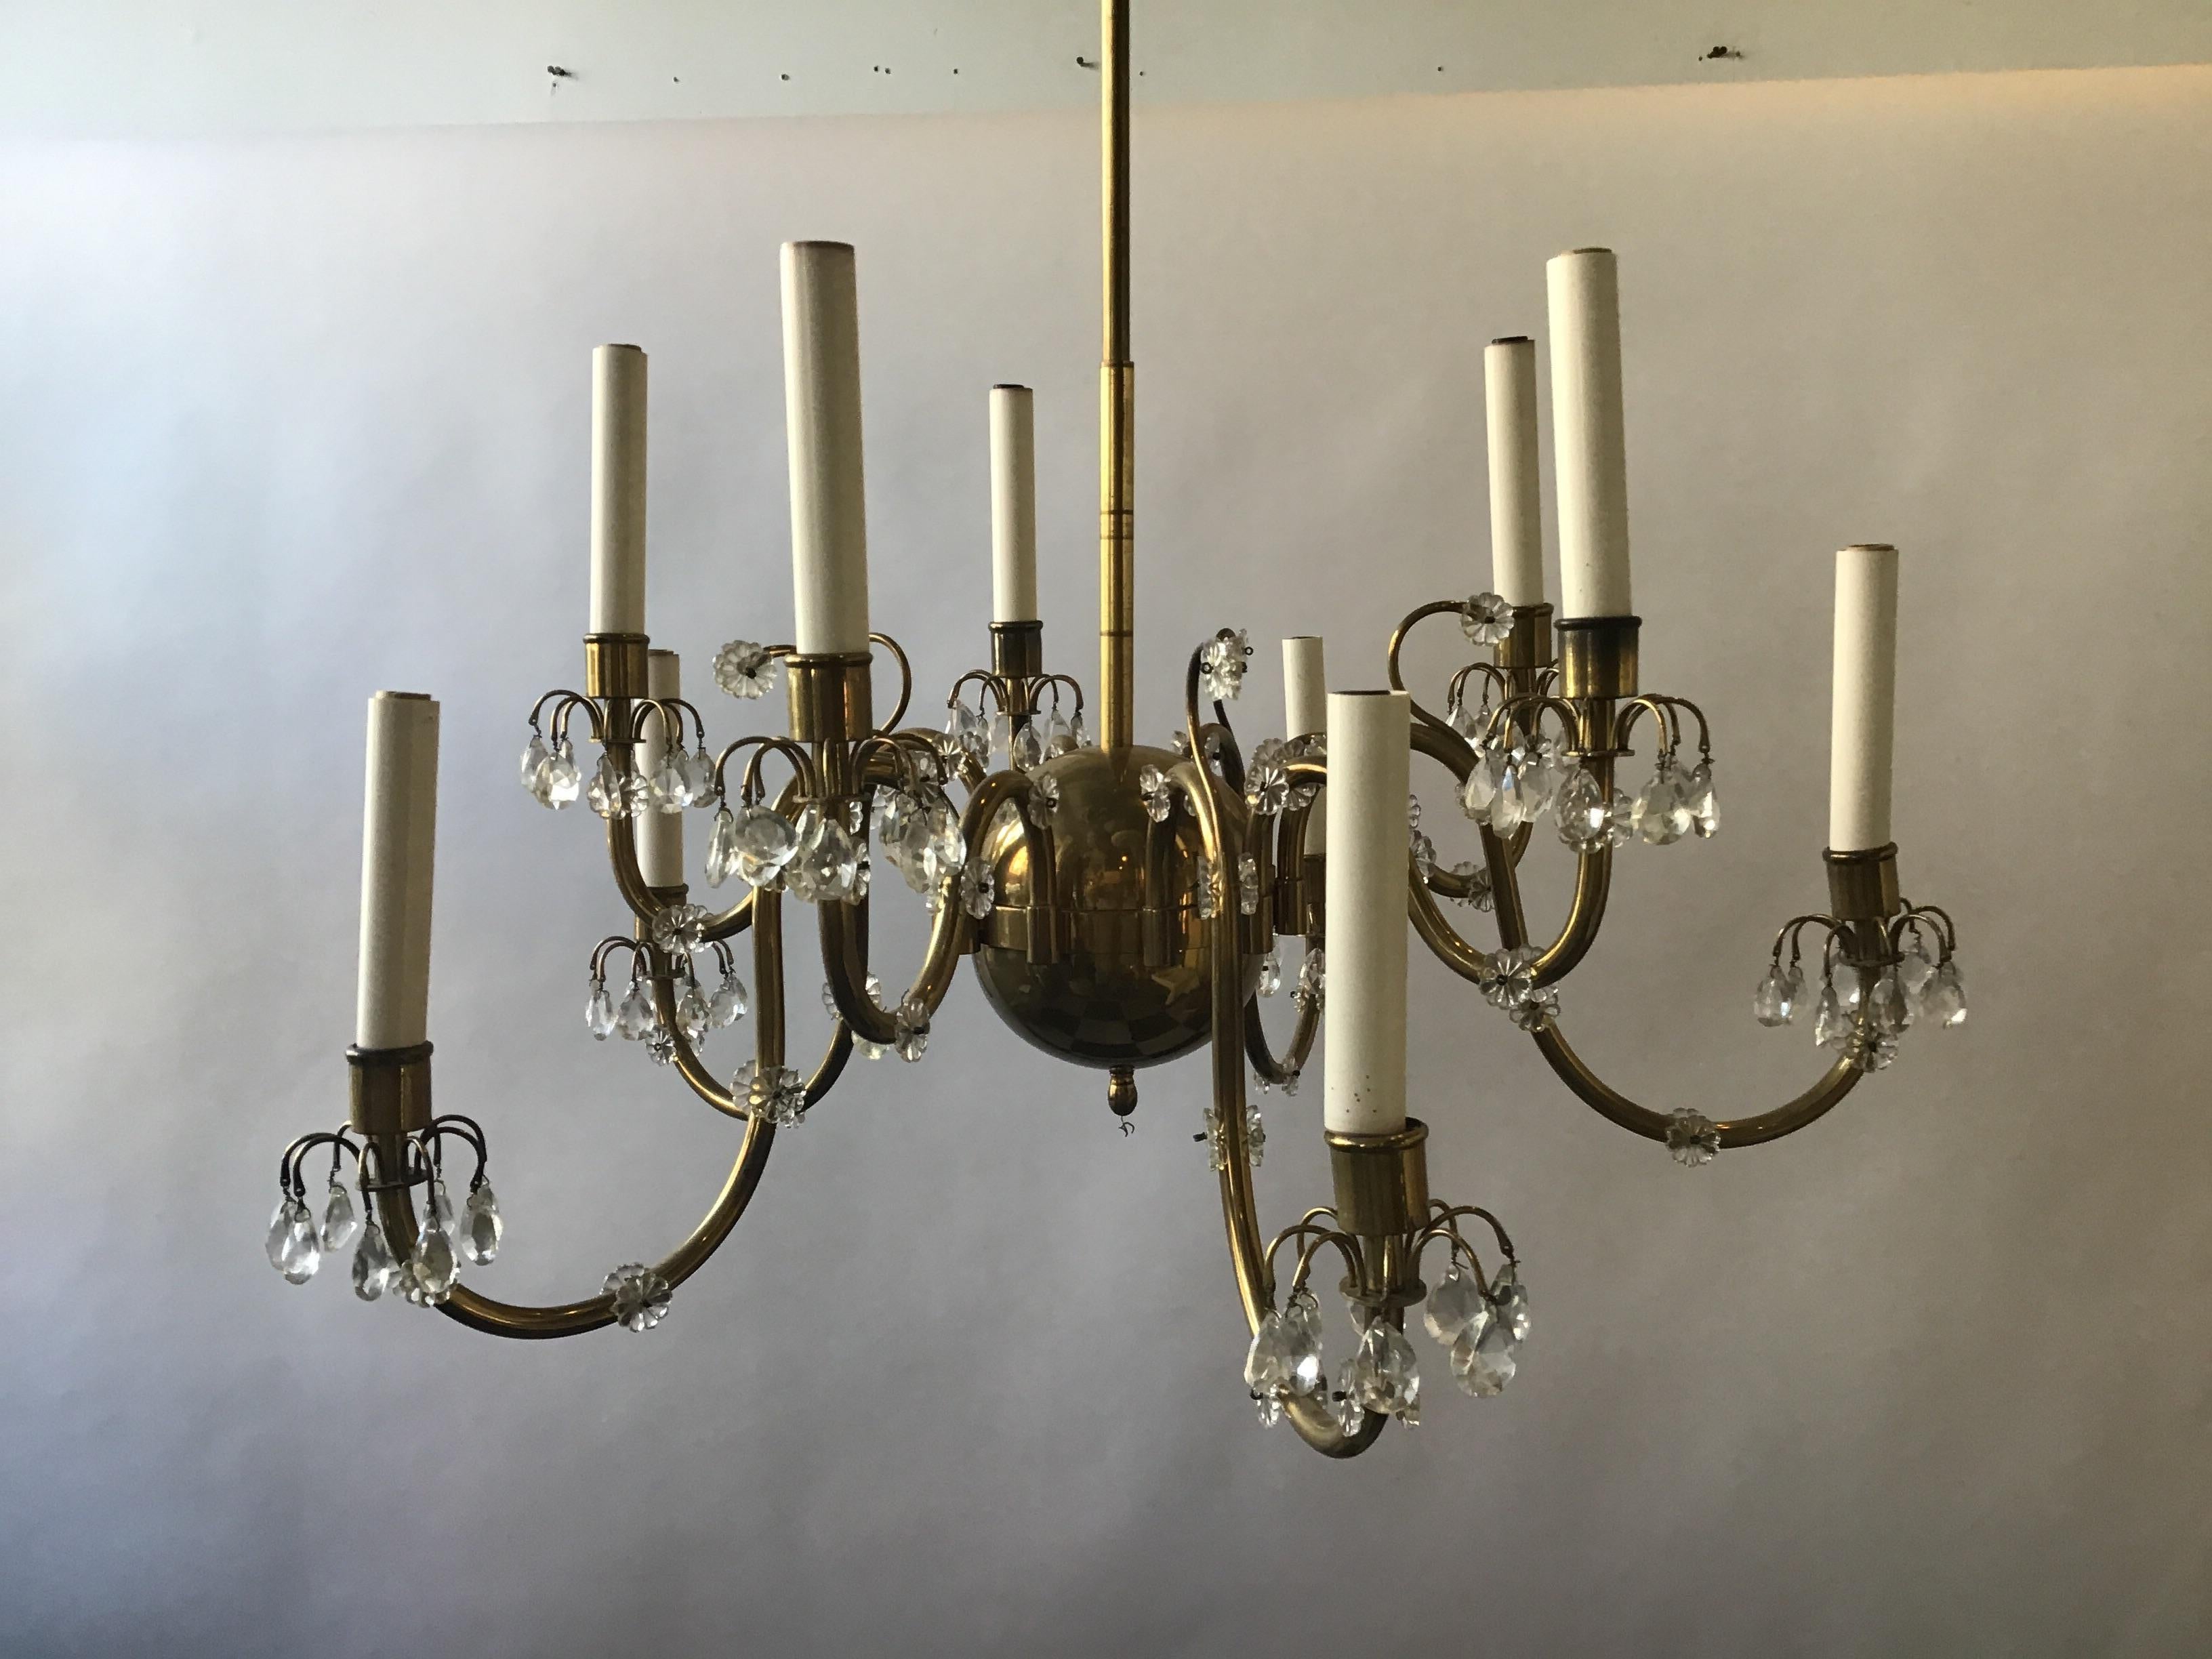 10 arm 1950s Italian brass and crystal chandelier. Needs re wiring.